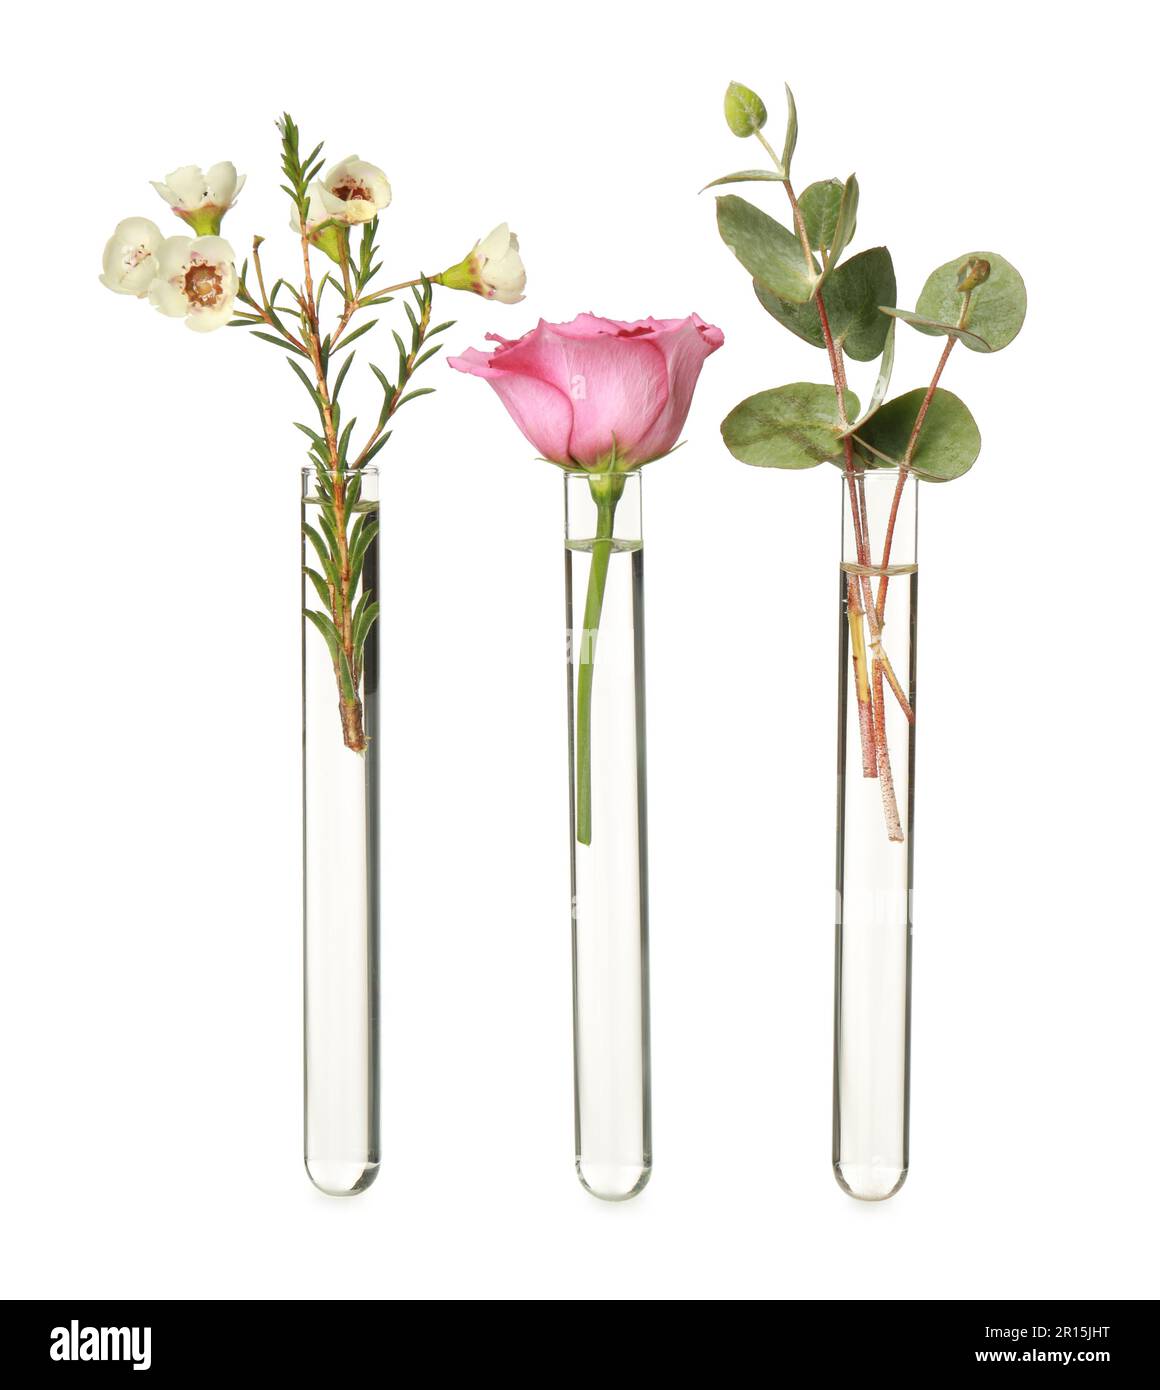 Different plants in test tubes on white background Stock Photo